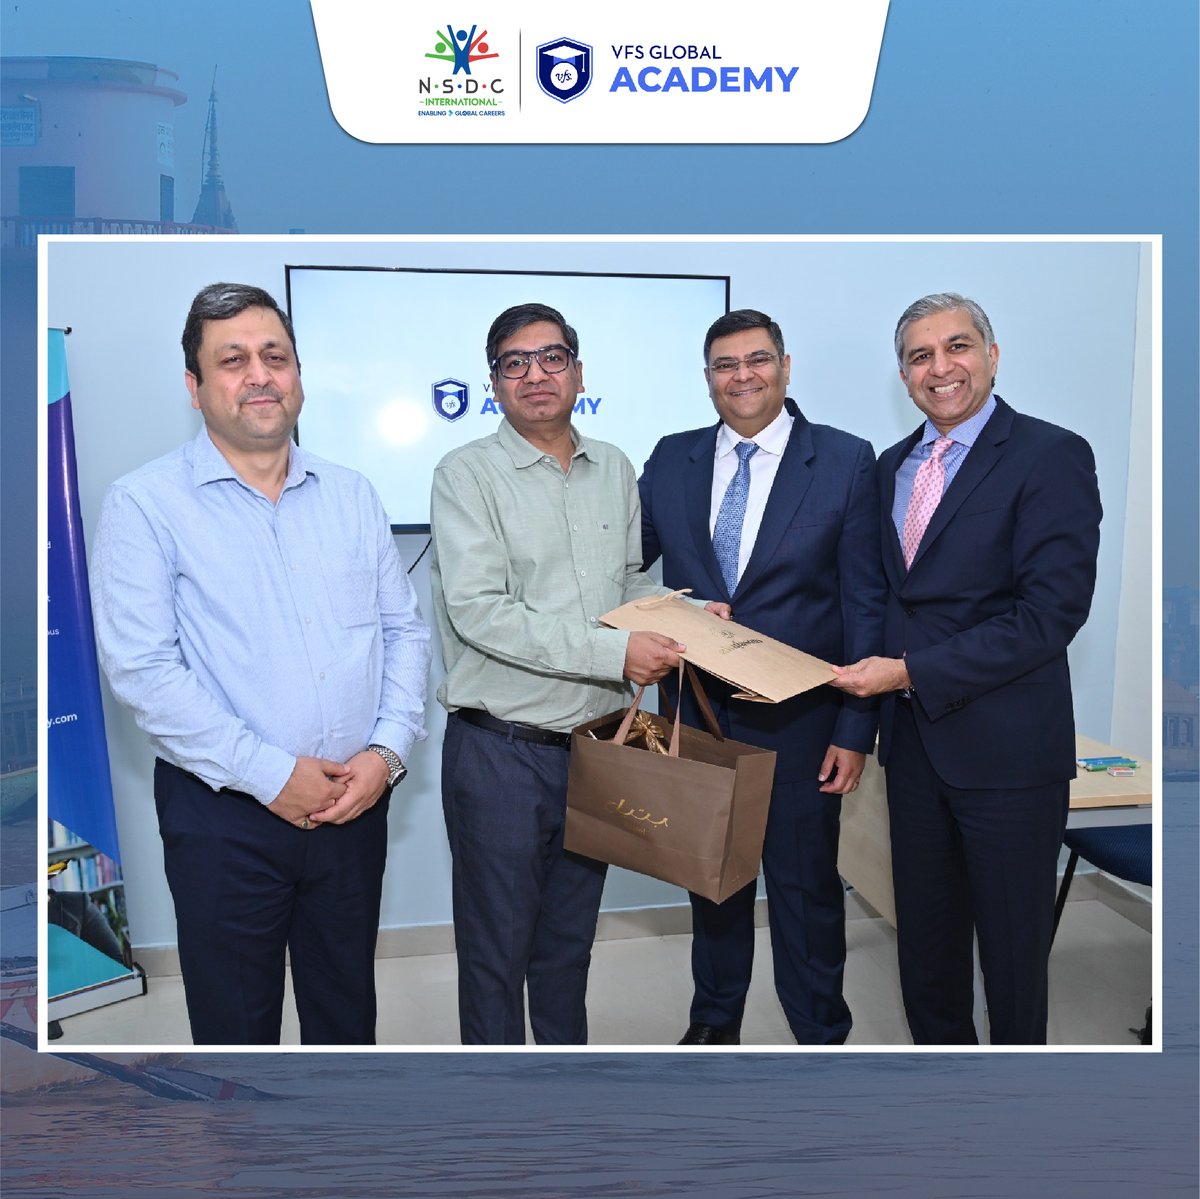 Empowering Varanasi's youth! NSDCI collaborates with VFS Global Academy to launch a top-notch Retail, Travel and Hospitality Training Academy in Varanasi! #SkillDevelopment #EmpoweringYouth #VaranasiEducationHub